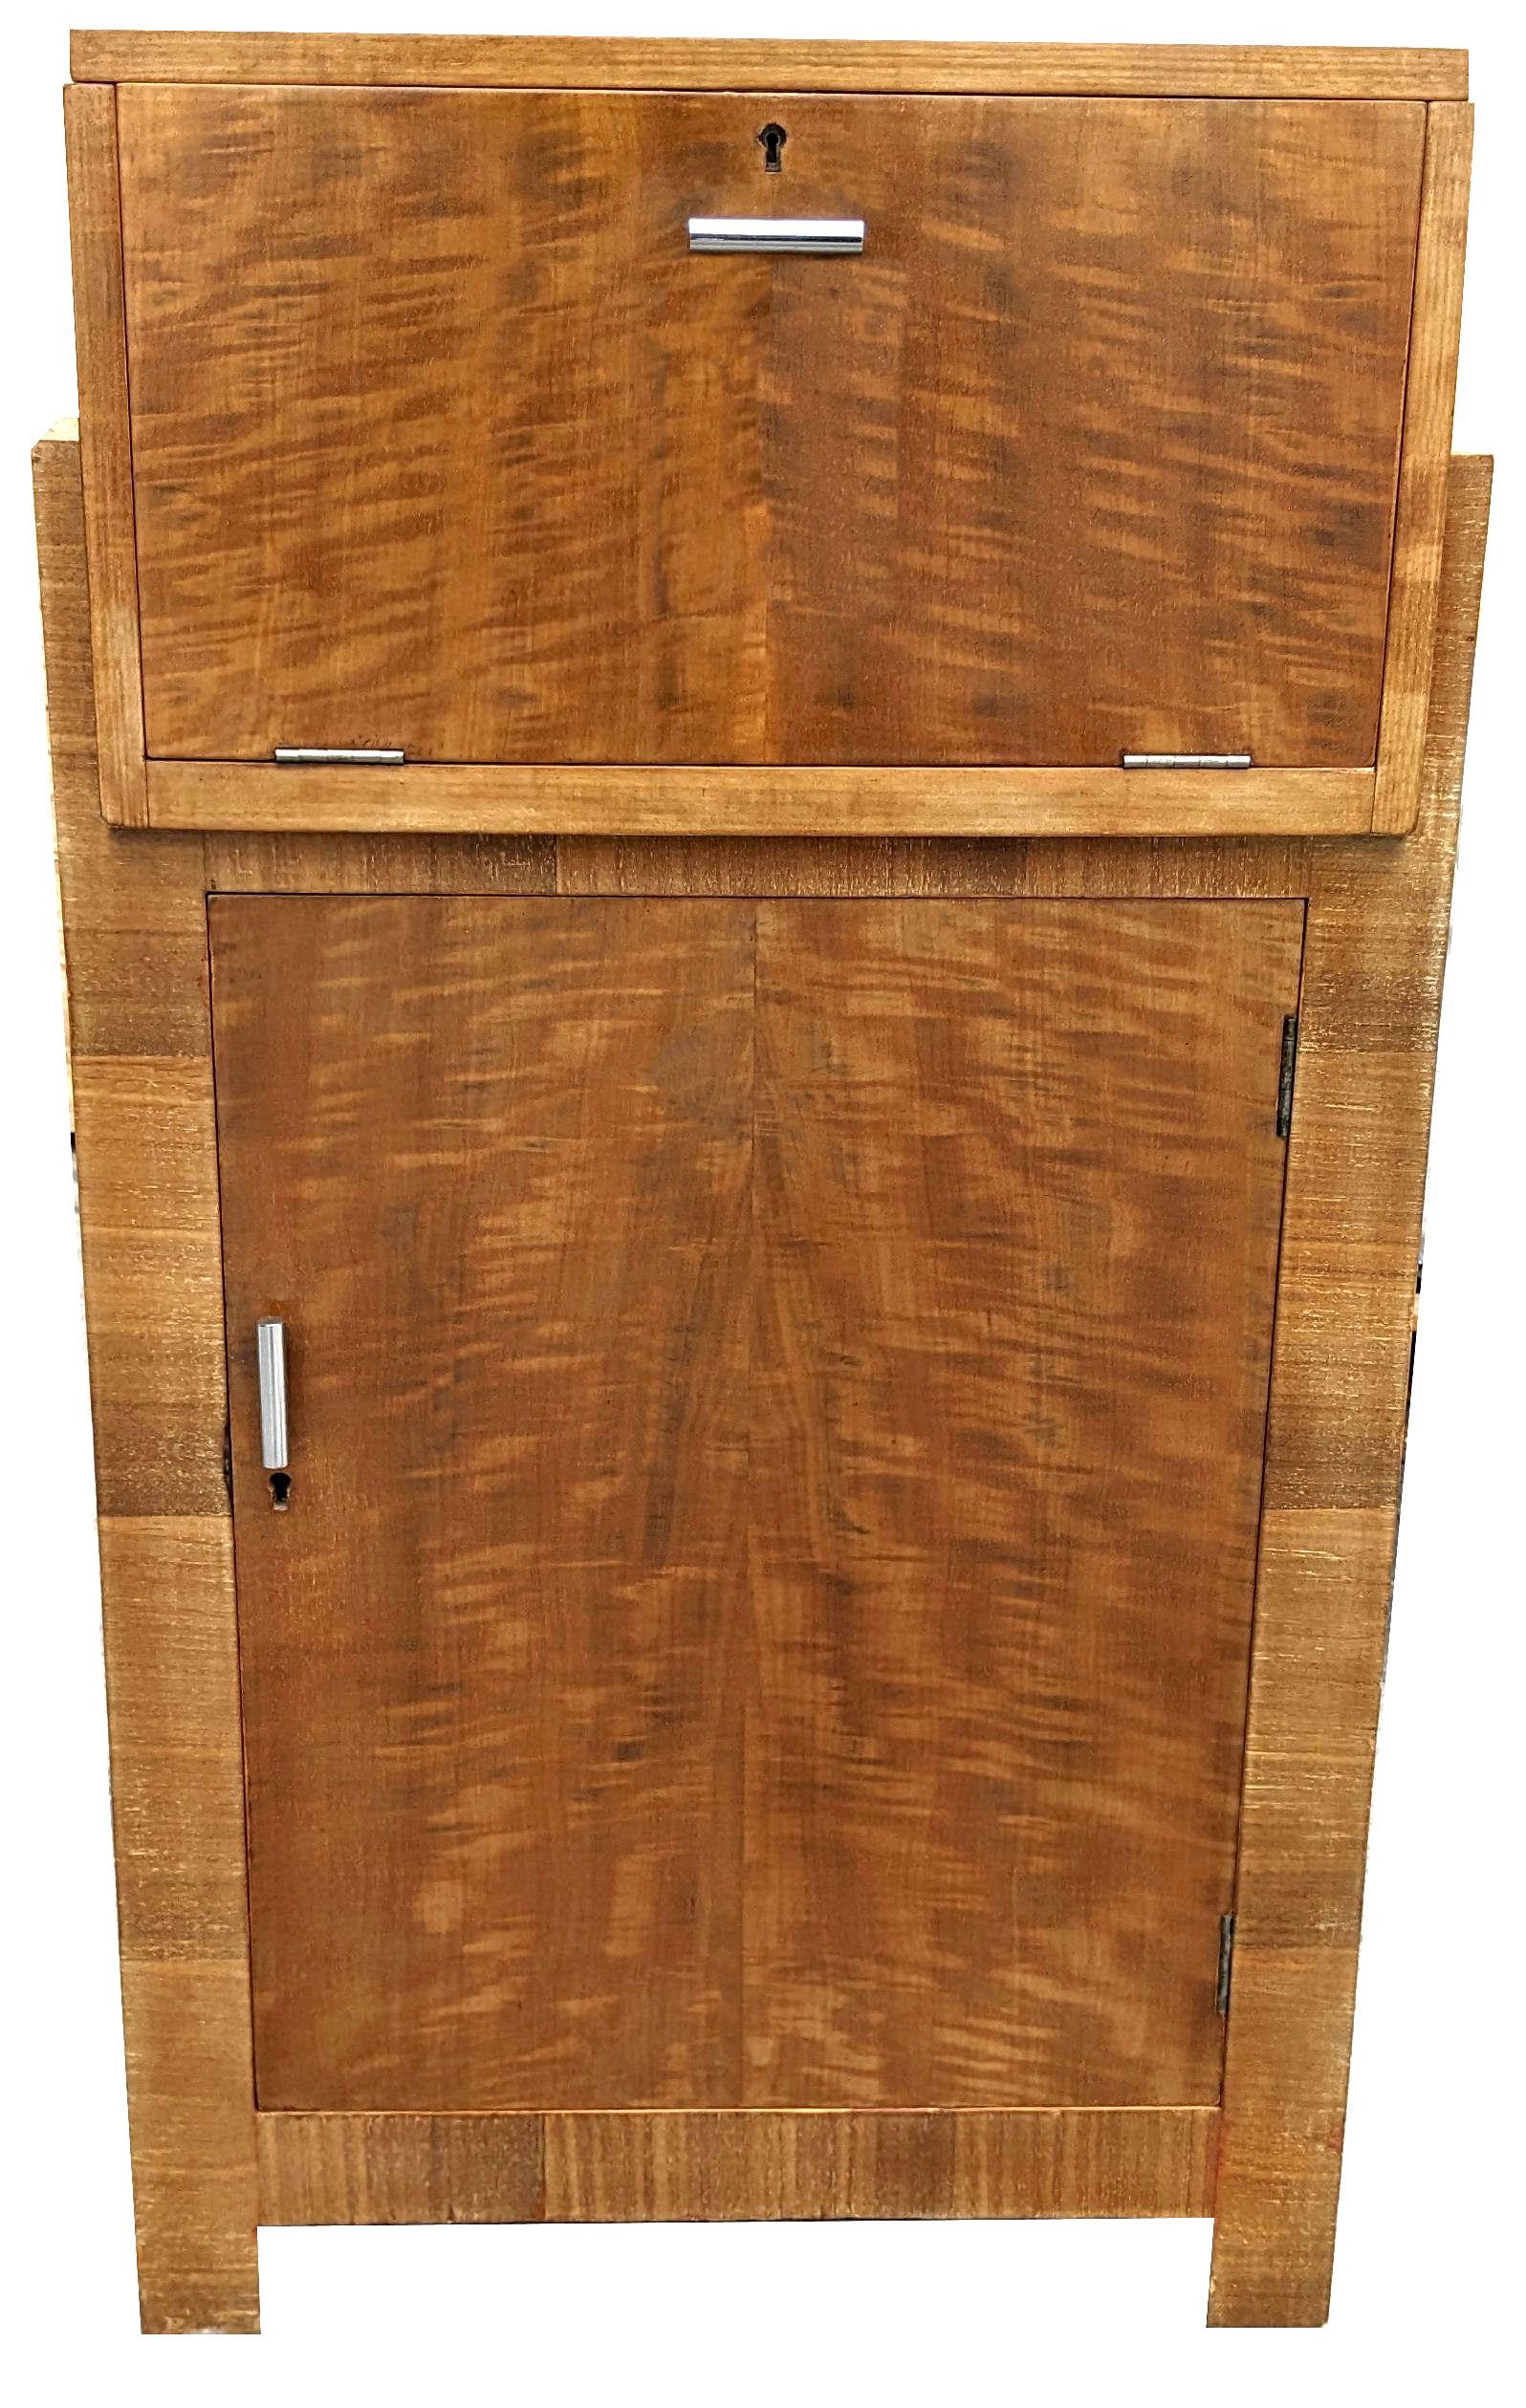 Mirror Art Deco Satinwood Cocktail Cabinet, Dry Bar By Waring & Gillow, England, c1930 For Sale